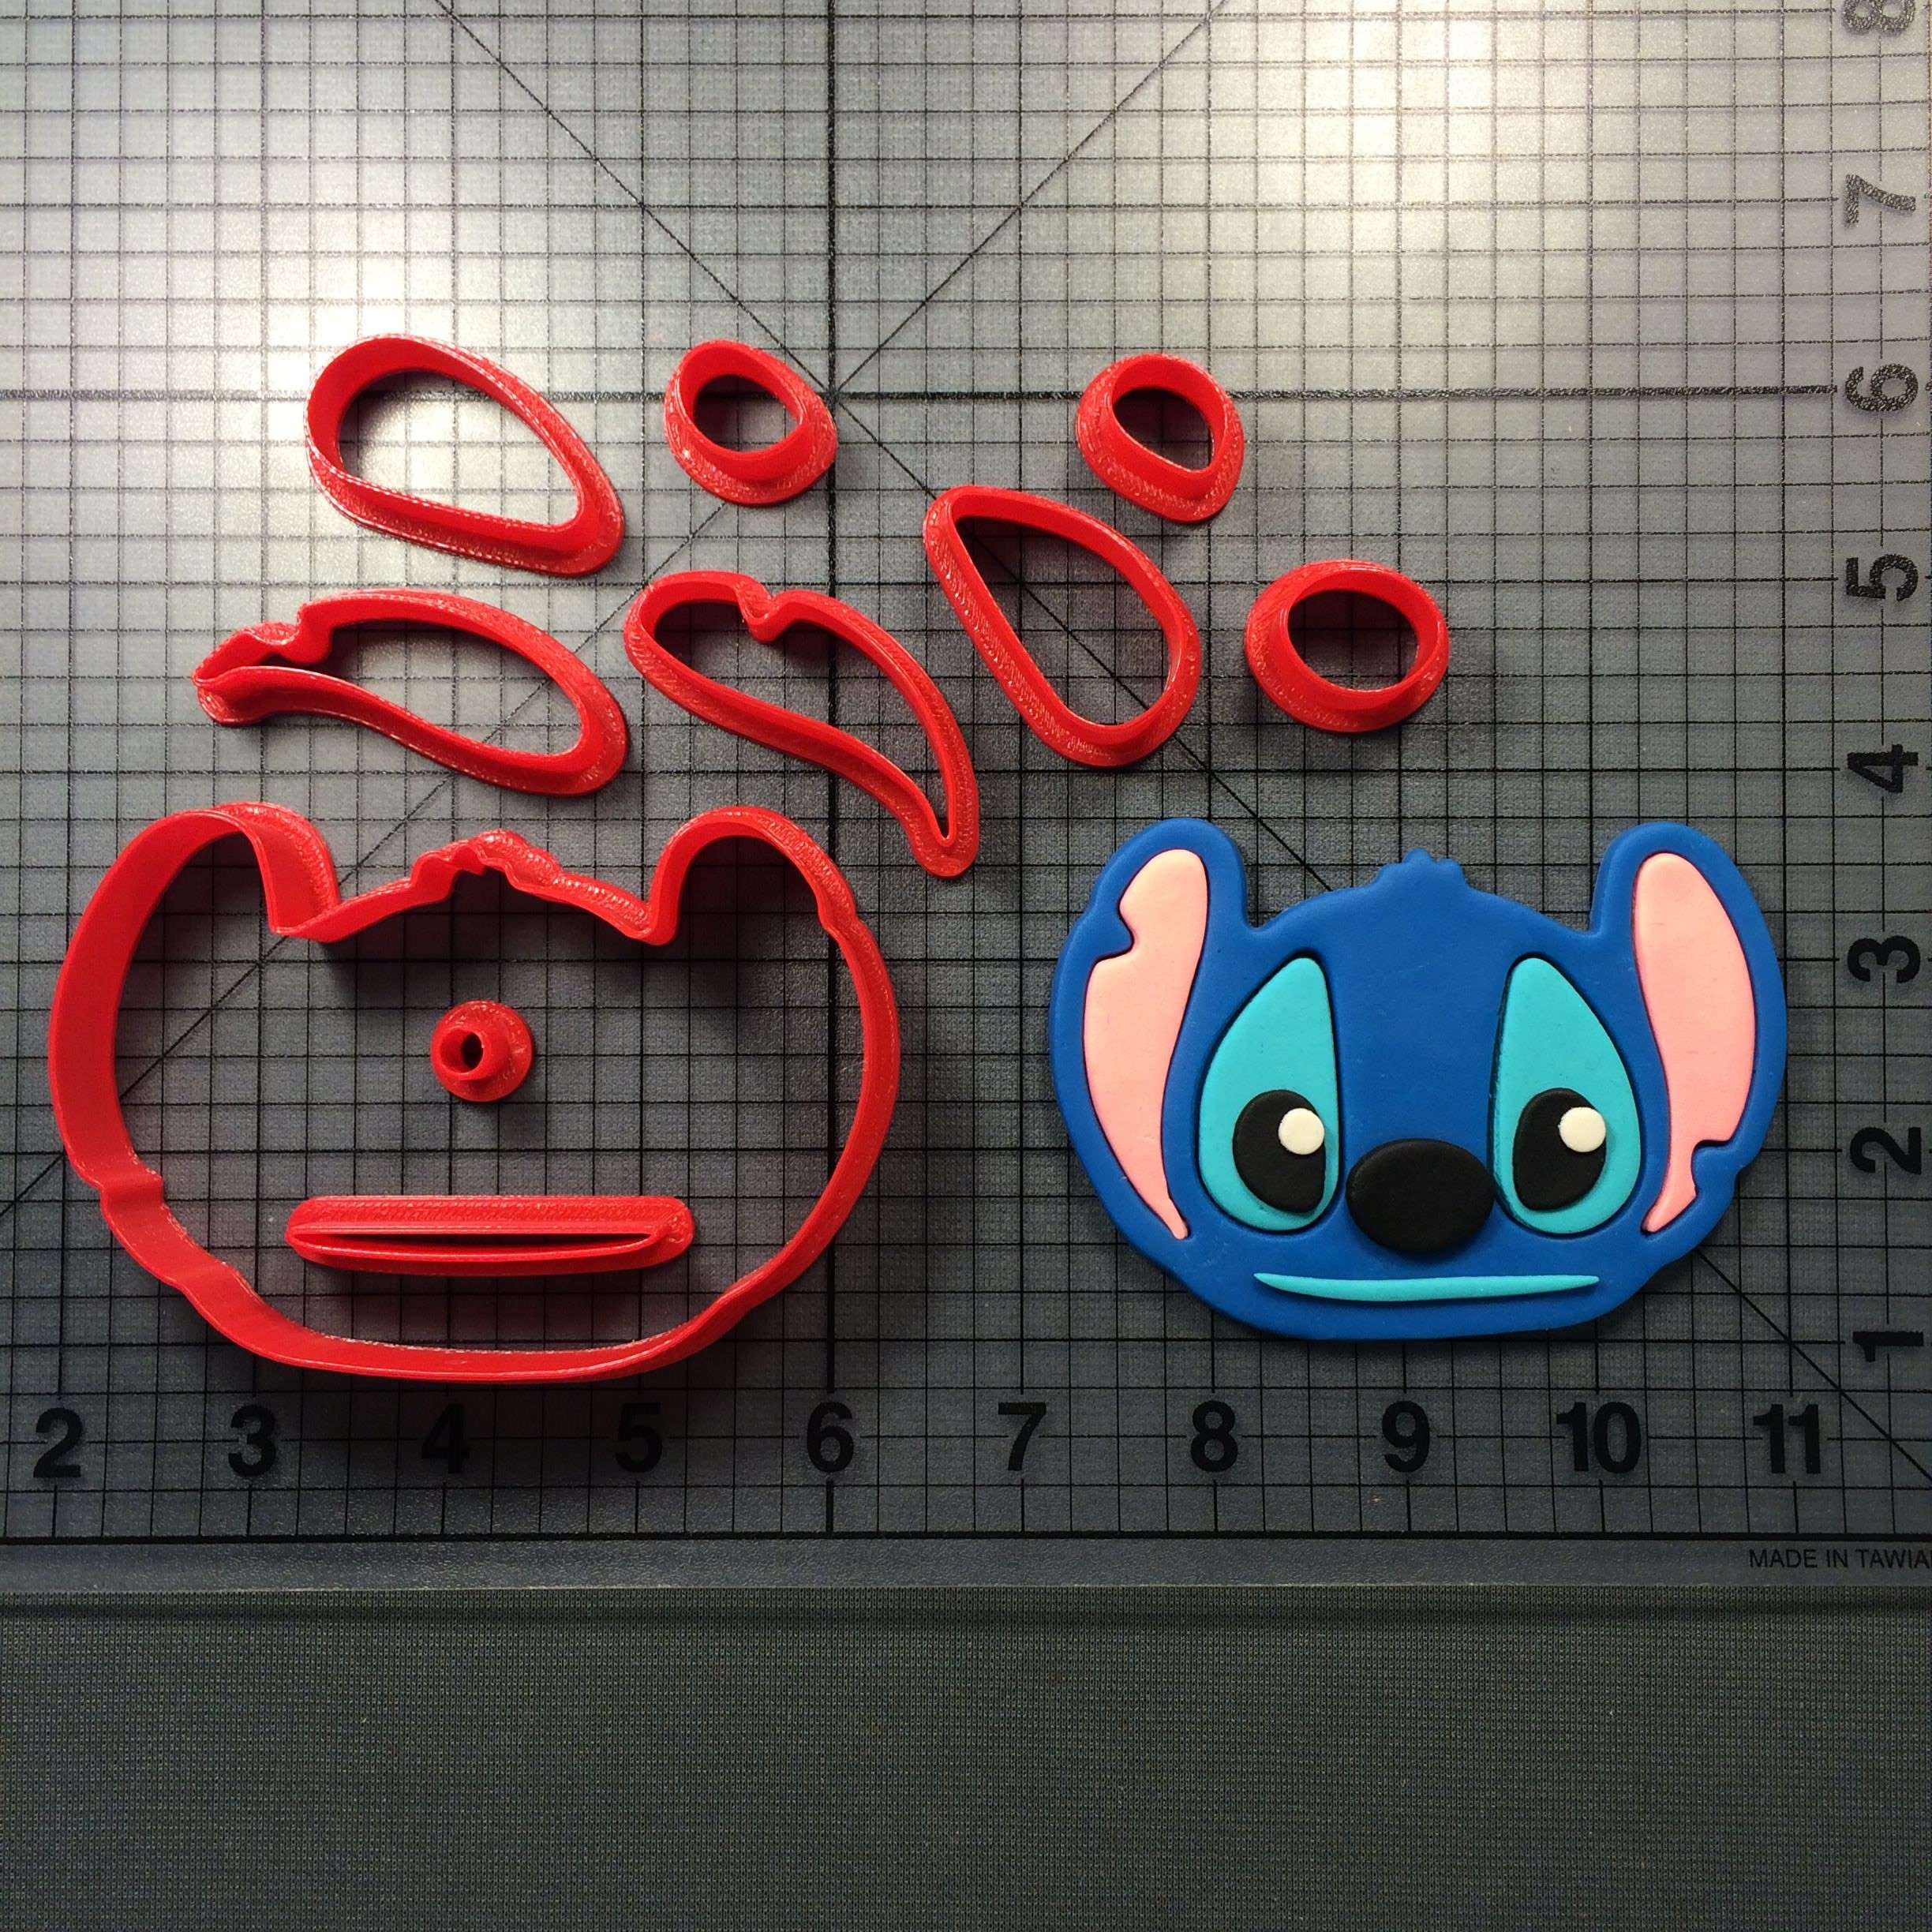 Cookie Cutter Inspired by Disney Lilo & Stitch 